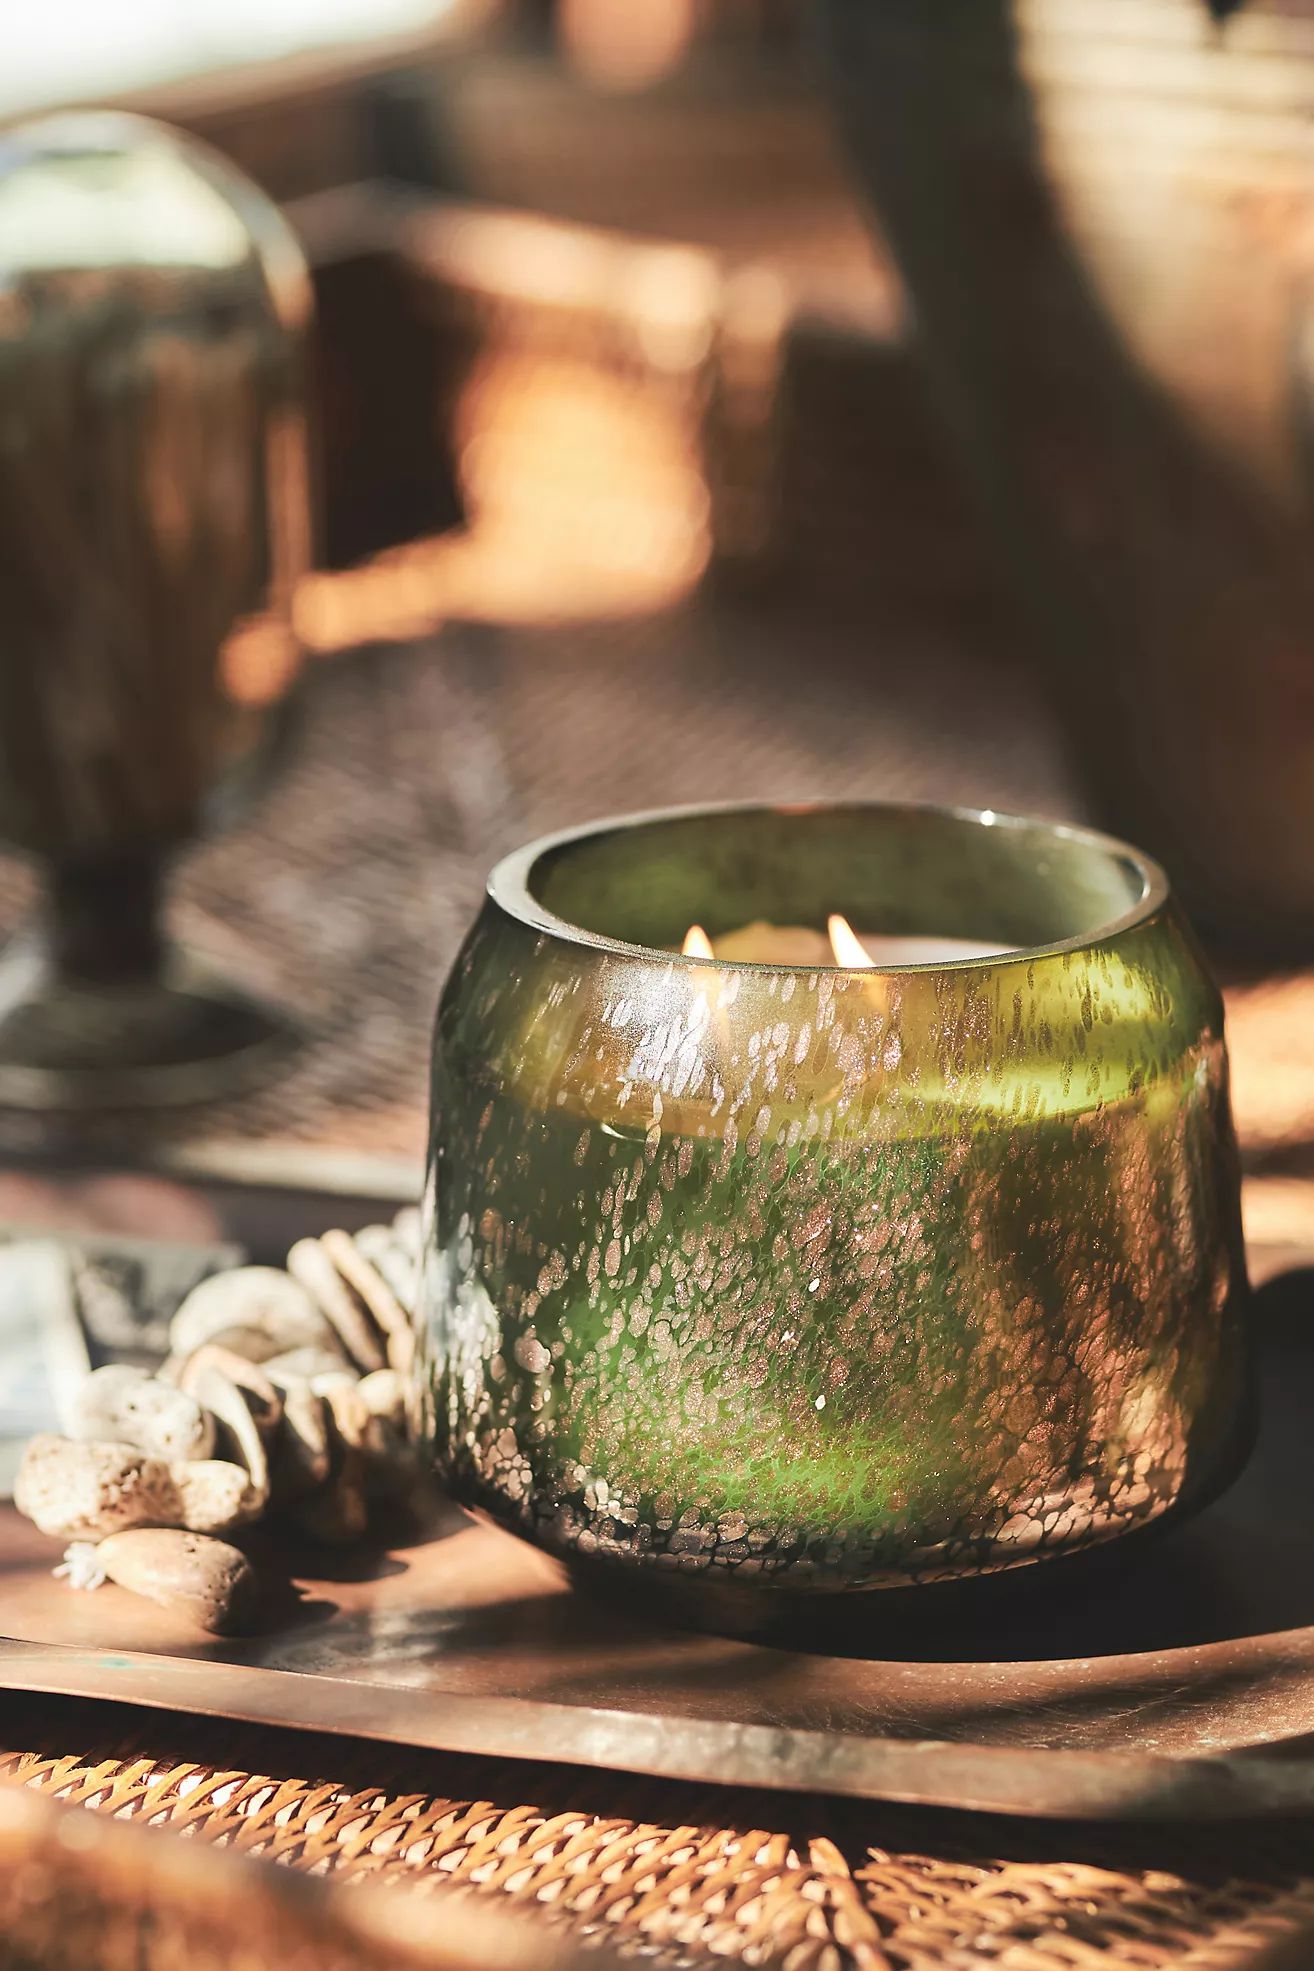 Kindred Woody Fresh Balsam & Cedarwood Glass Candle | Anthropologie (US)